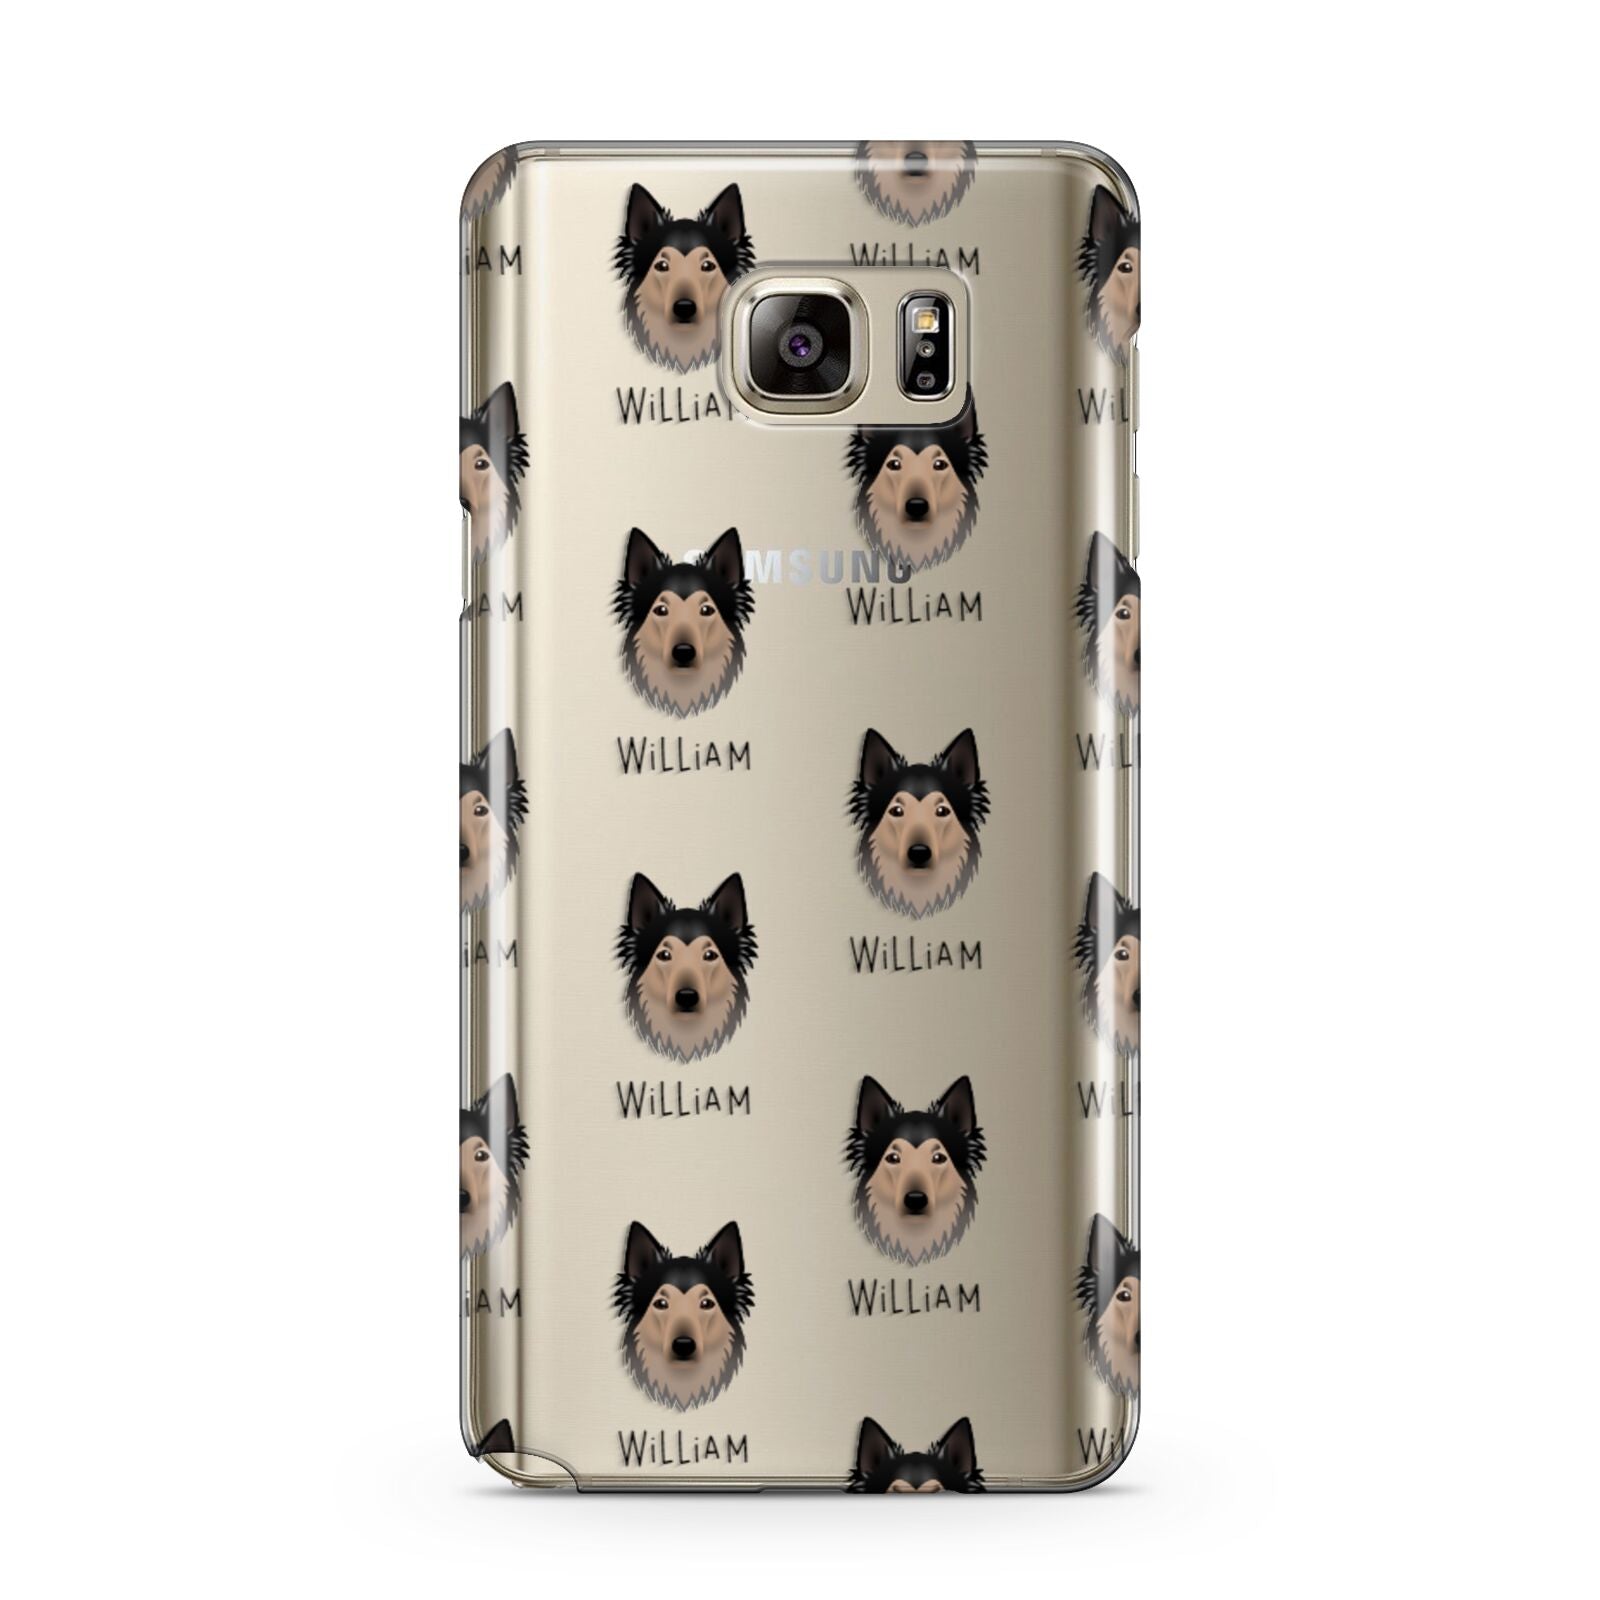 Shollie Icon with Name Samsung Galaxy Note 5 Case